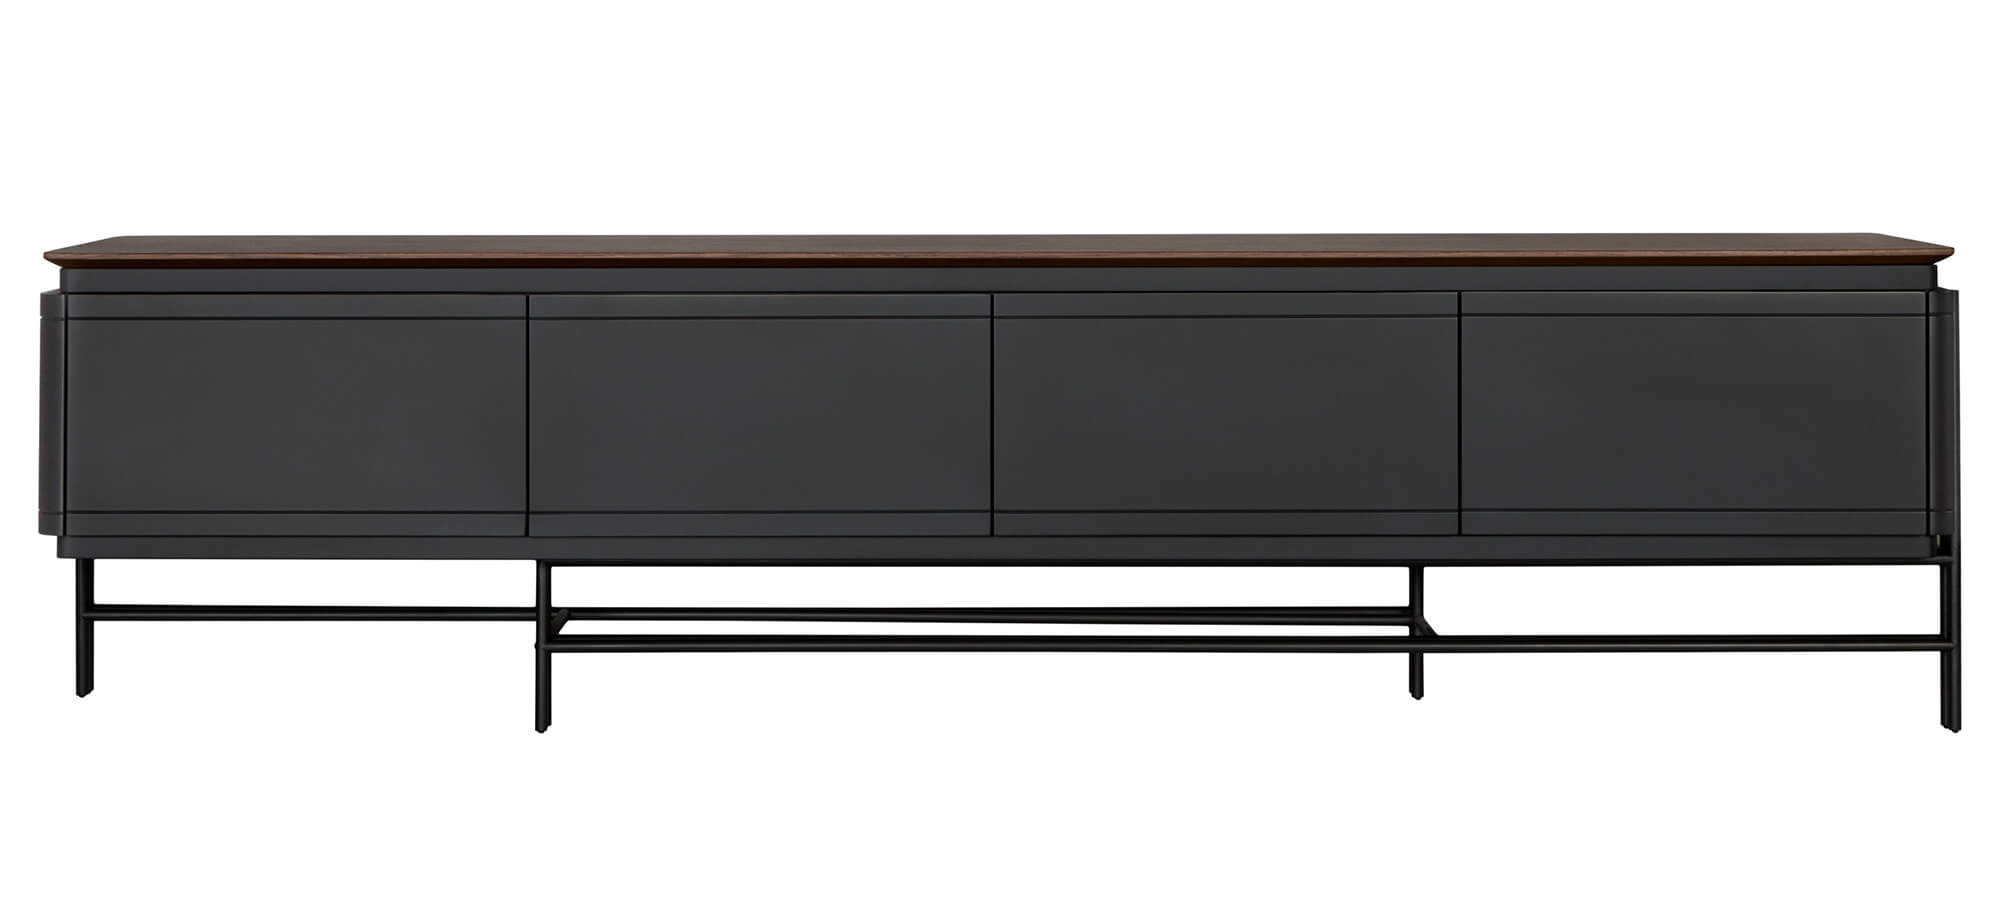 Nihil 011 lowboard in coal lacquer and walnut top. al2 art for living